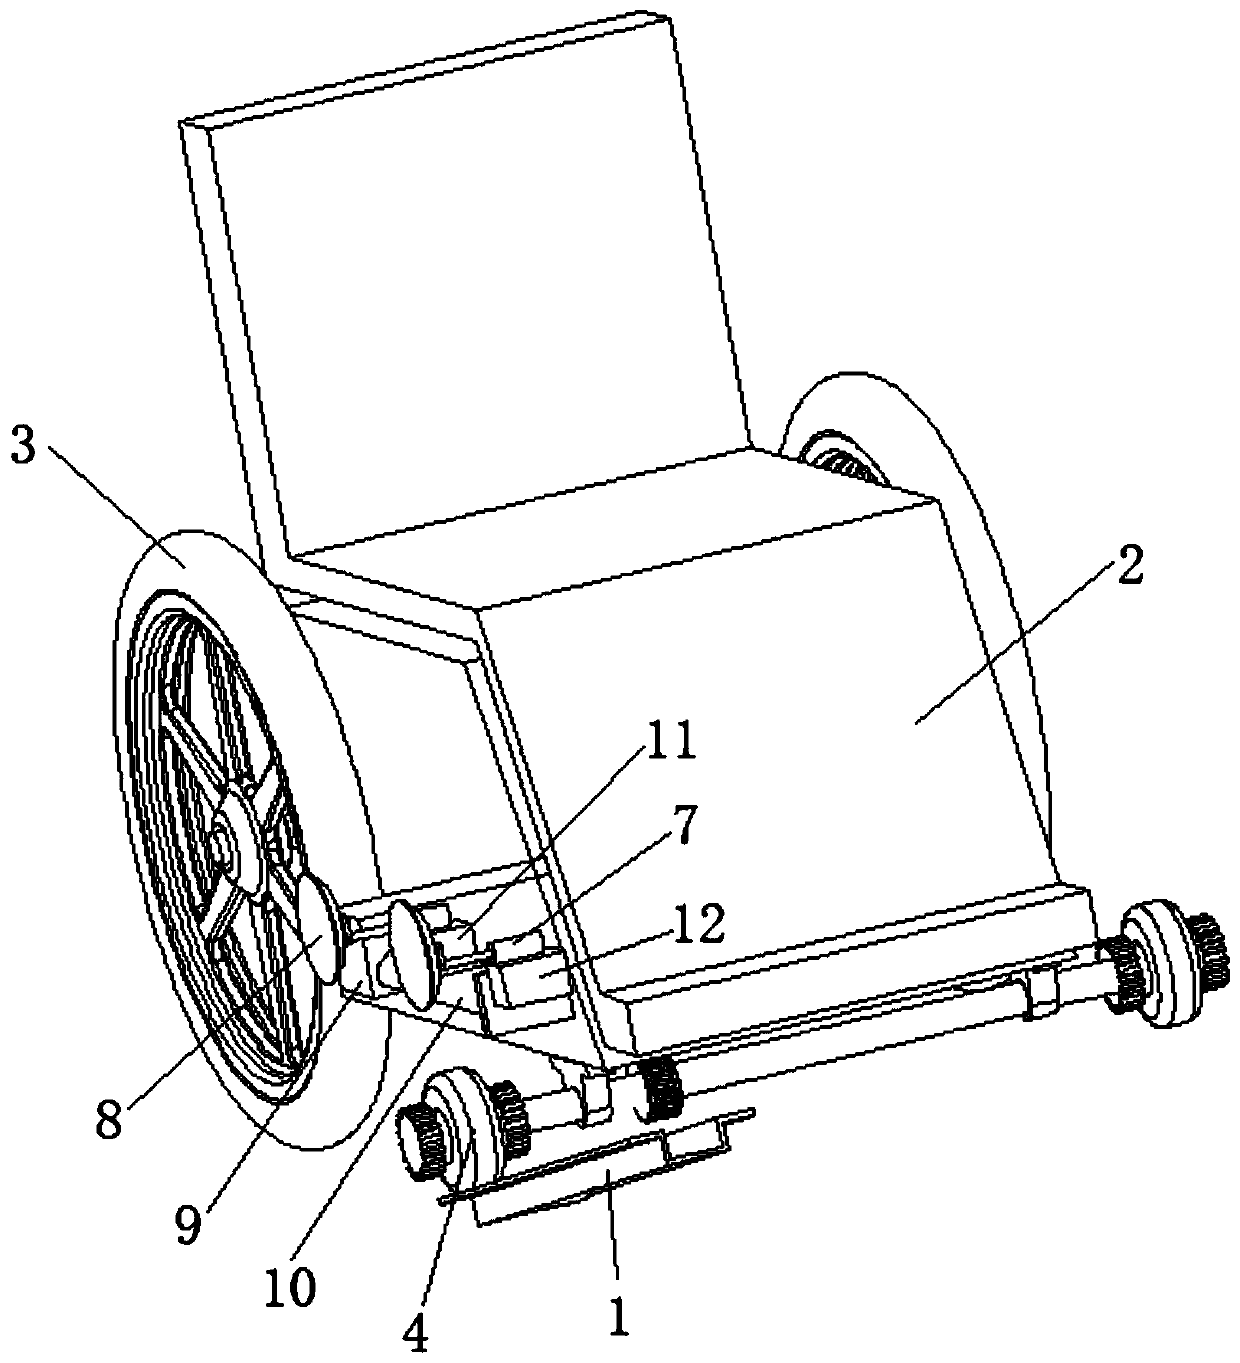 Auxiliary device for wheelchair to go up and down stairs